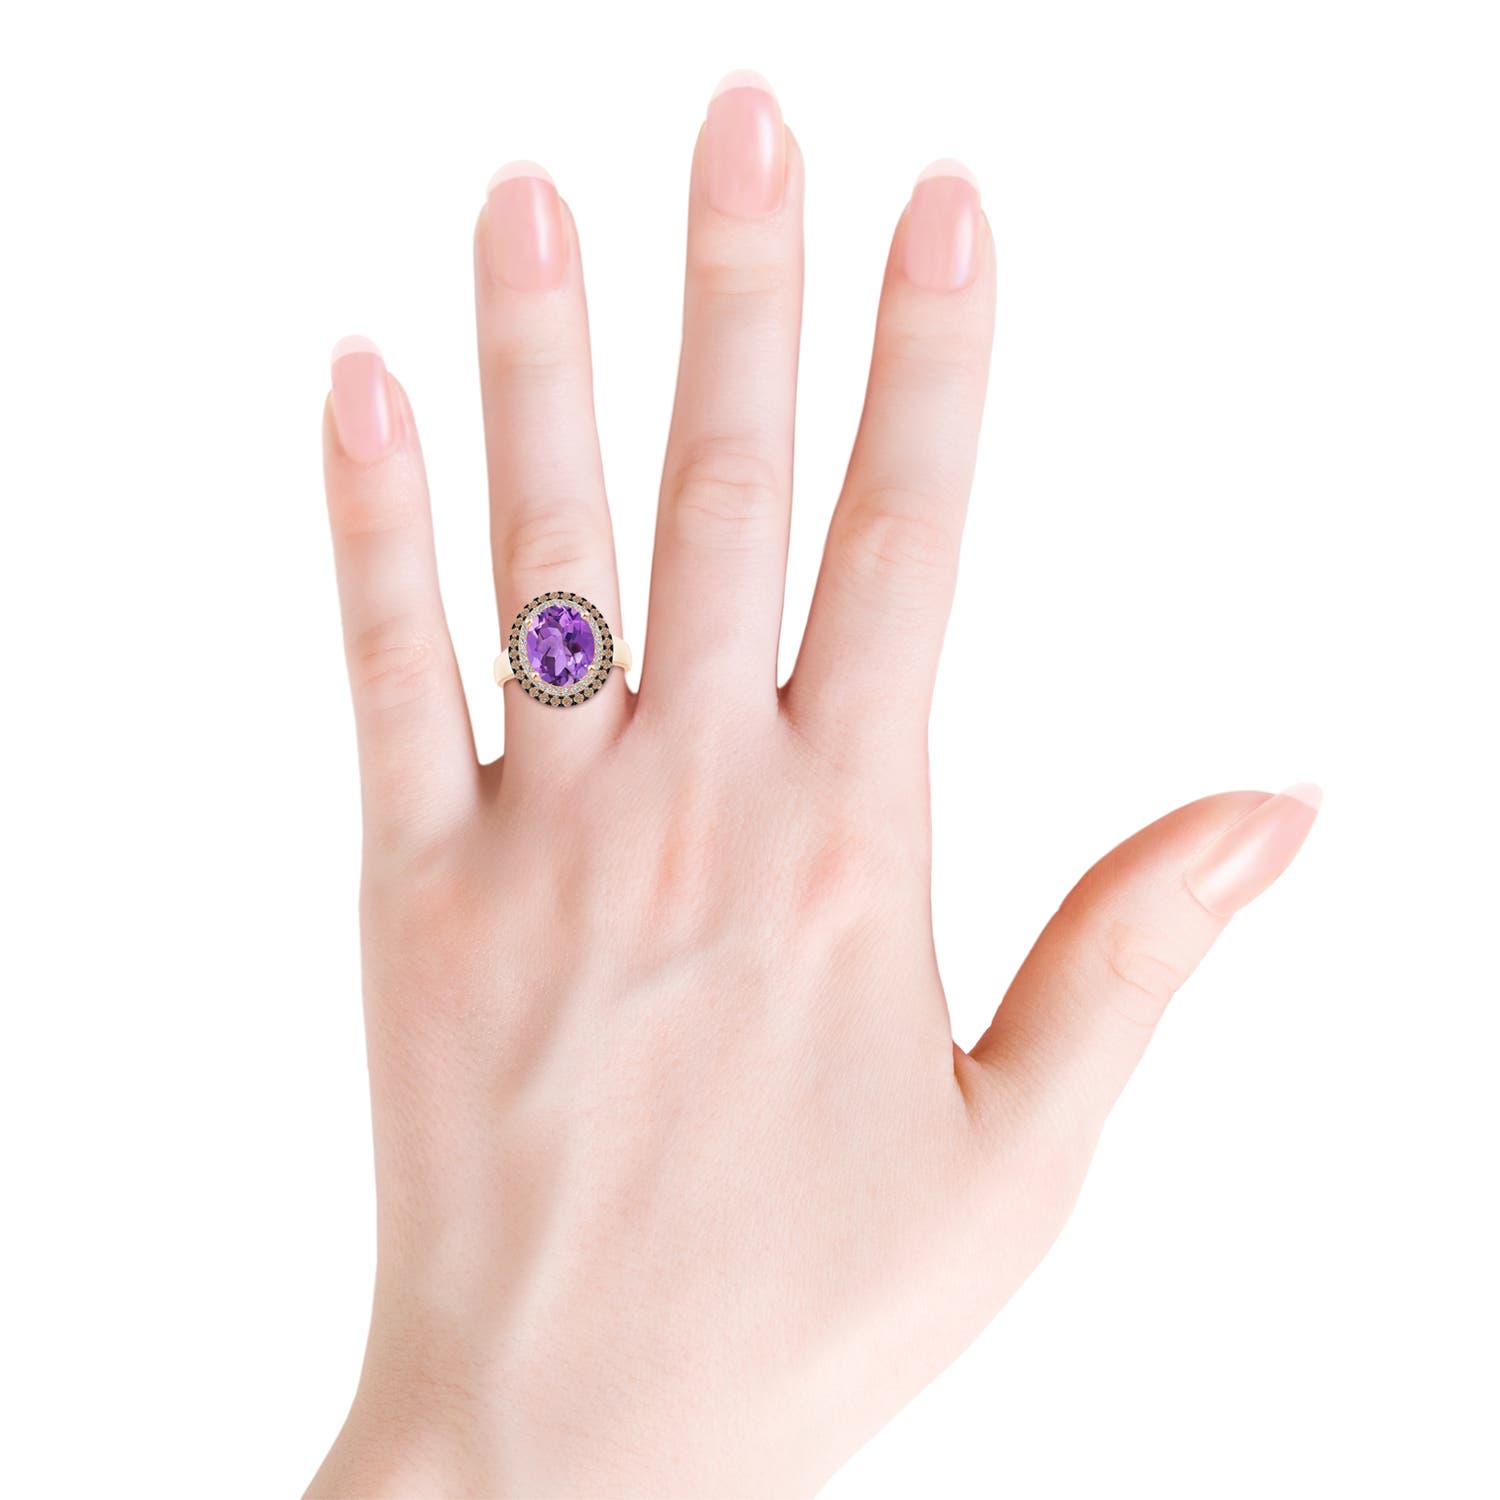 AA - Amethyst / 3.71 CT / 14 KT Rose Gold